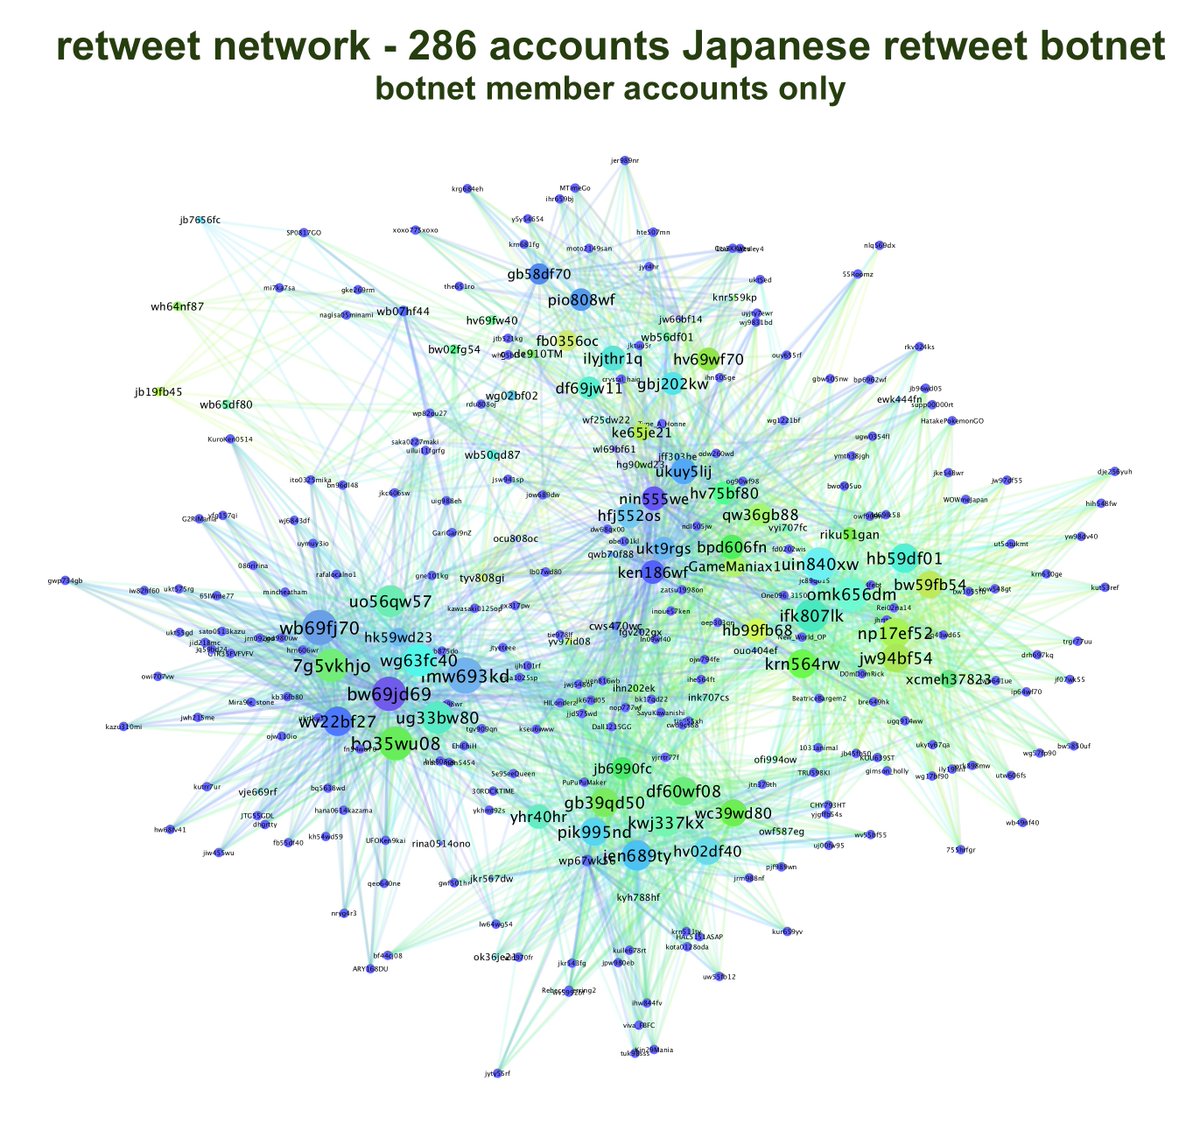 85.7% of the tweets sent produced by these bots are retweets. They also produce original tweets, which are mostly strings of emoticons and are among the tweets retweeted by the network, although none of the botnet members are in the top 50 accounts retweeted.